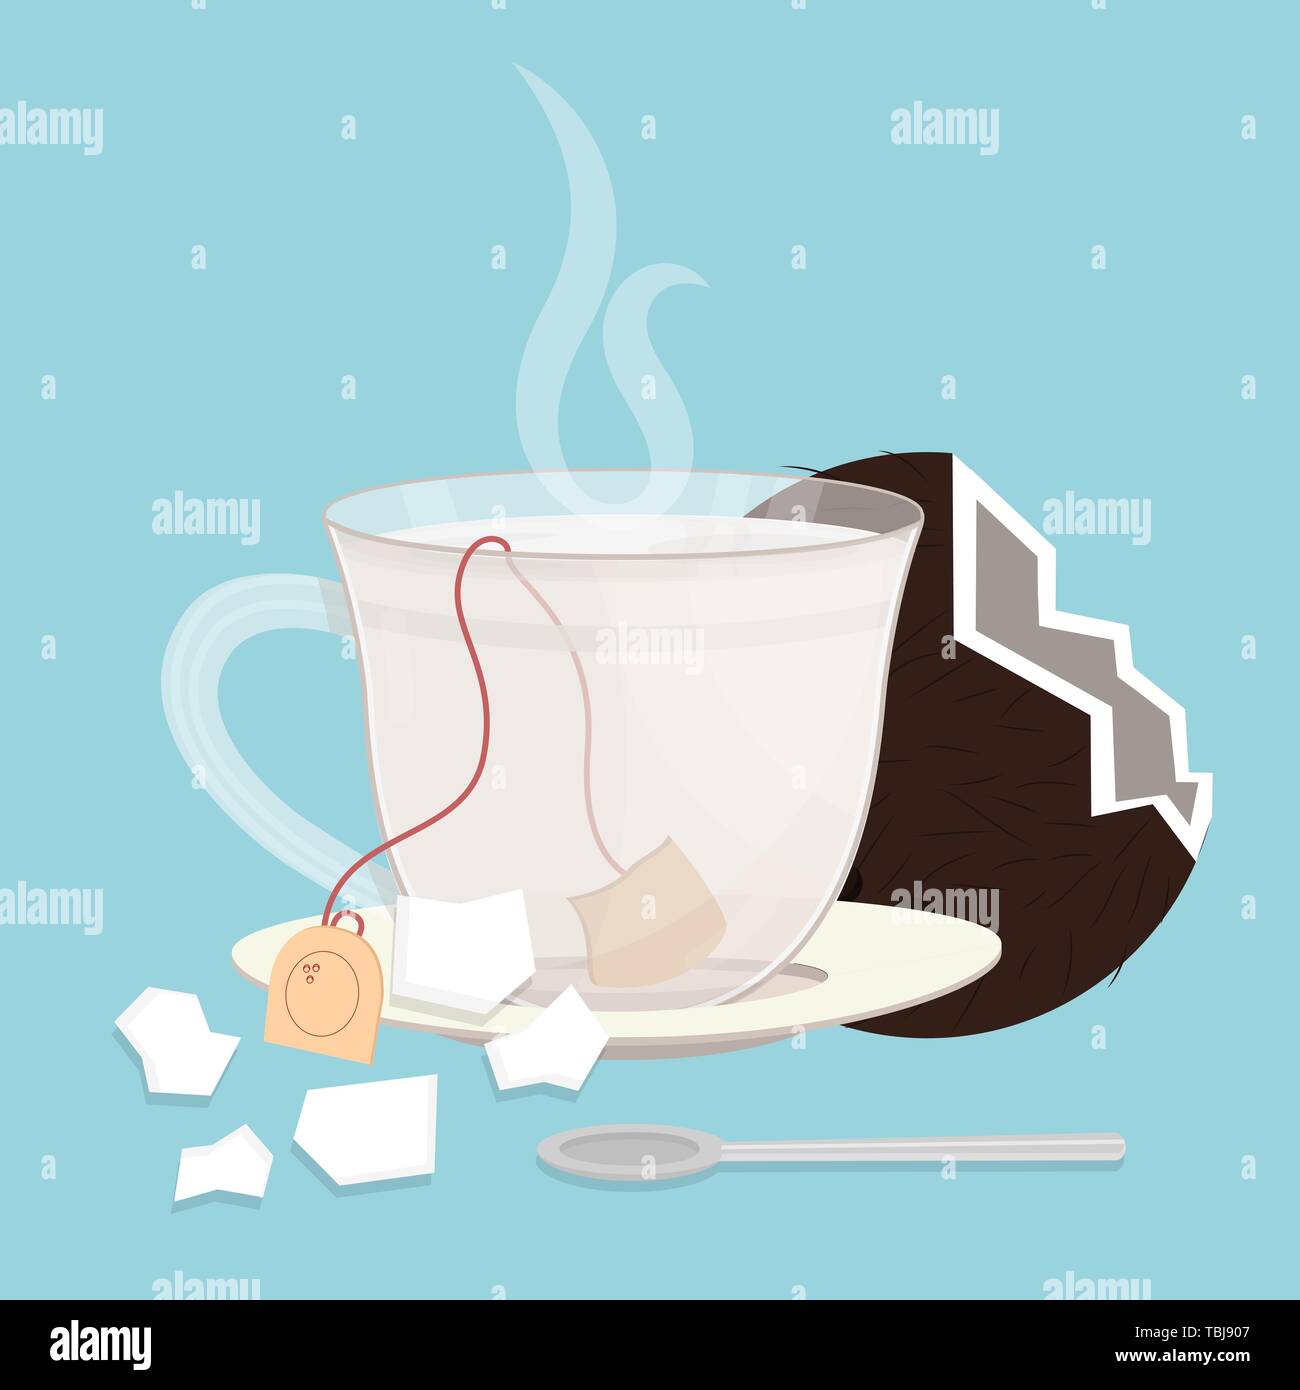 Cup of coconut tea. Tea sachet with pieces of coconut on the saucer. Coconut fruit behind the cup. Smoke on the drink. Spoon in front of cup. Stock Vector